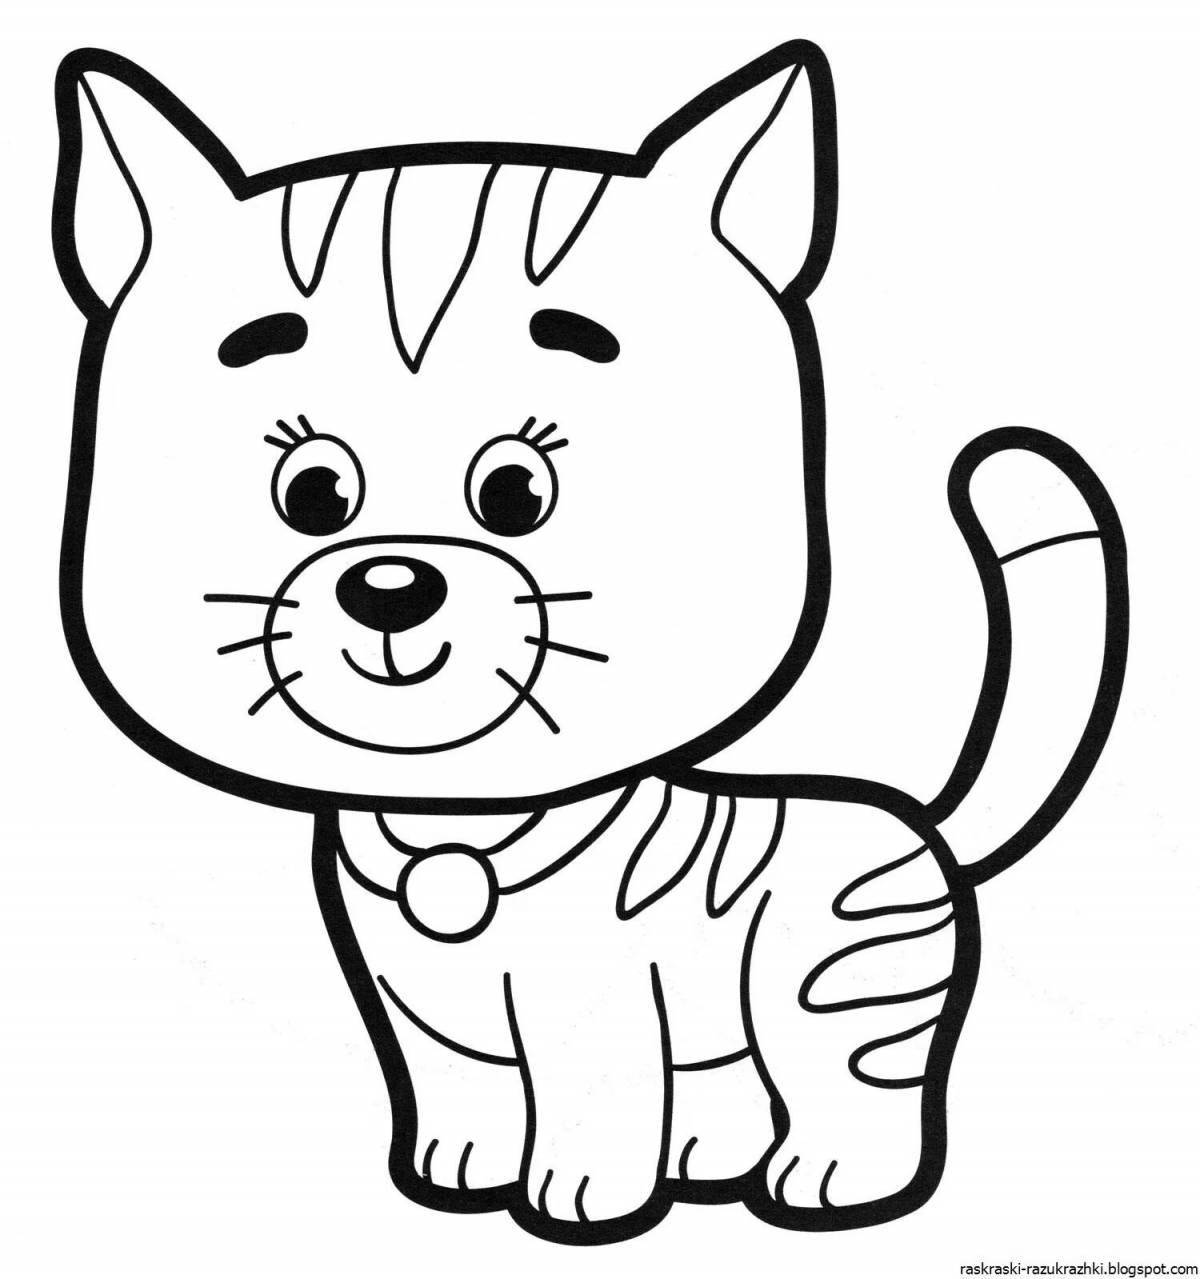 Adorable kitten coloring book for 3-4 year olds